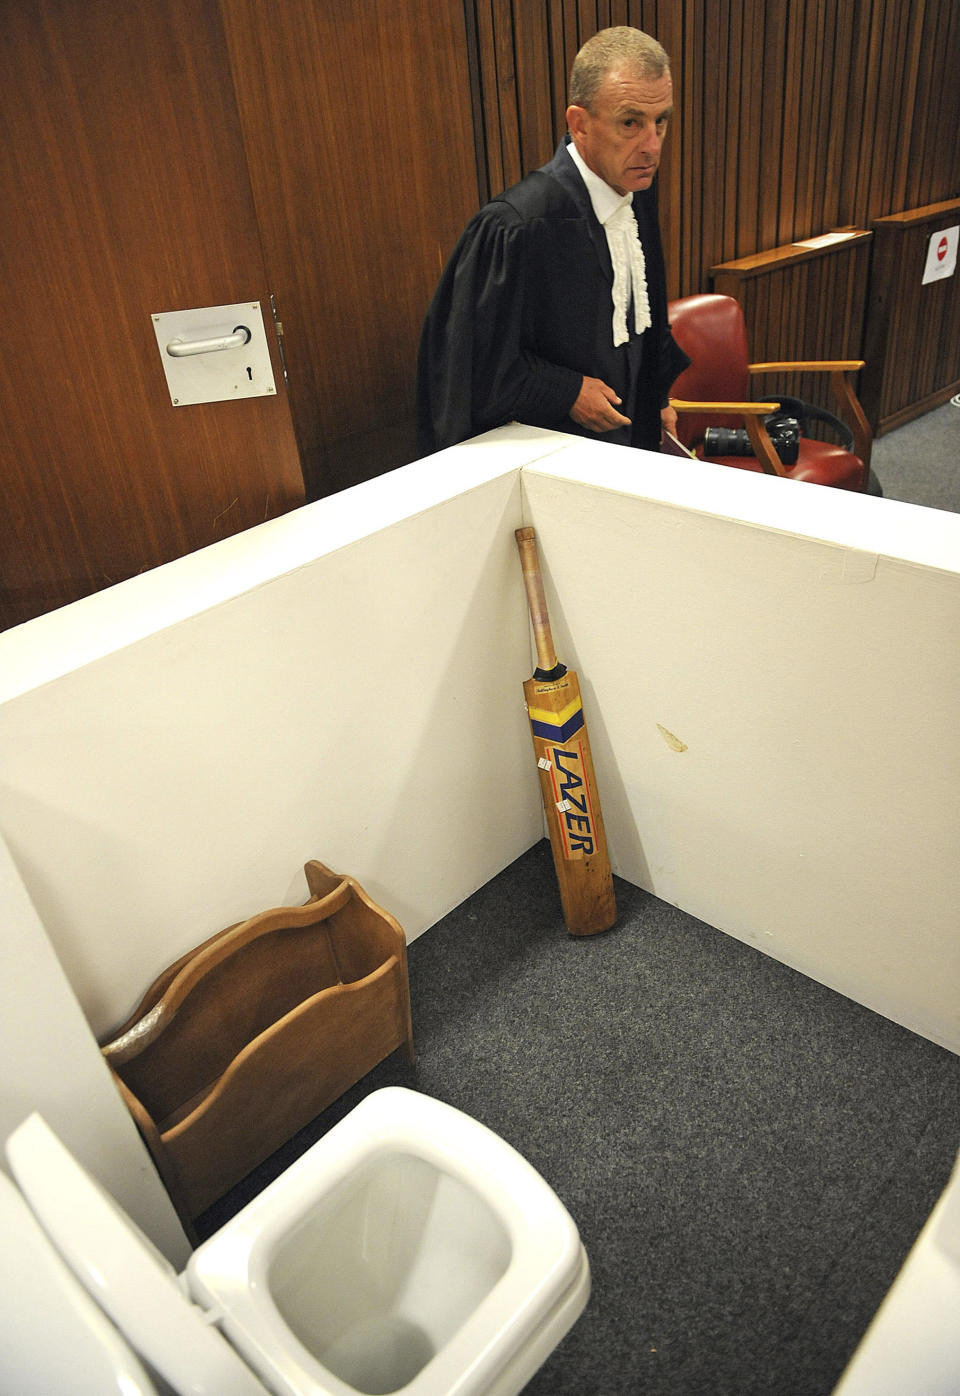 FILE — State prosecutor Gerrie Nel, alongside a reconstruction of a toilet cubicle, in court Monday, April 14, 2014, through which Oscar Pistorius shot and killed his girlfriend, Reeva Steenkamp on St. Valentine's day in 2013. Pistorius shot Steenkamp more than a decade ago in a killing that jolted the world and shattered the image of a sports superstar. (AP Photo/Antoine de Ras, Pool, File)